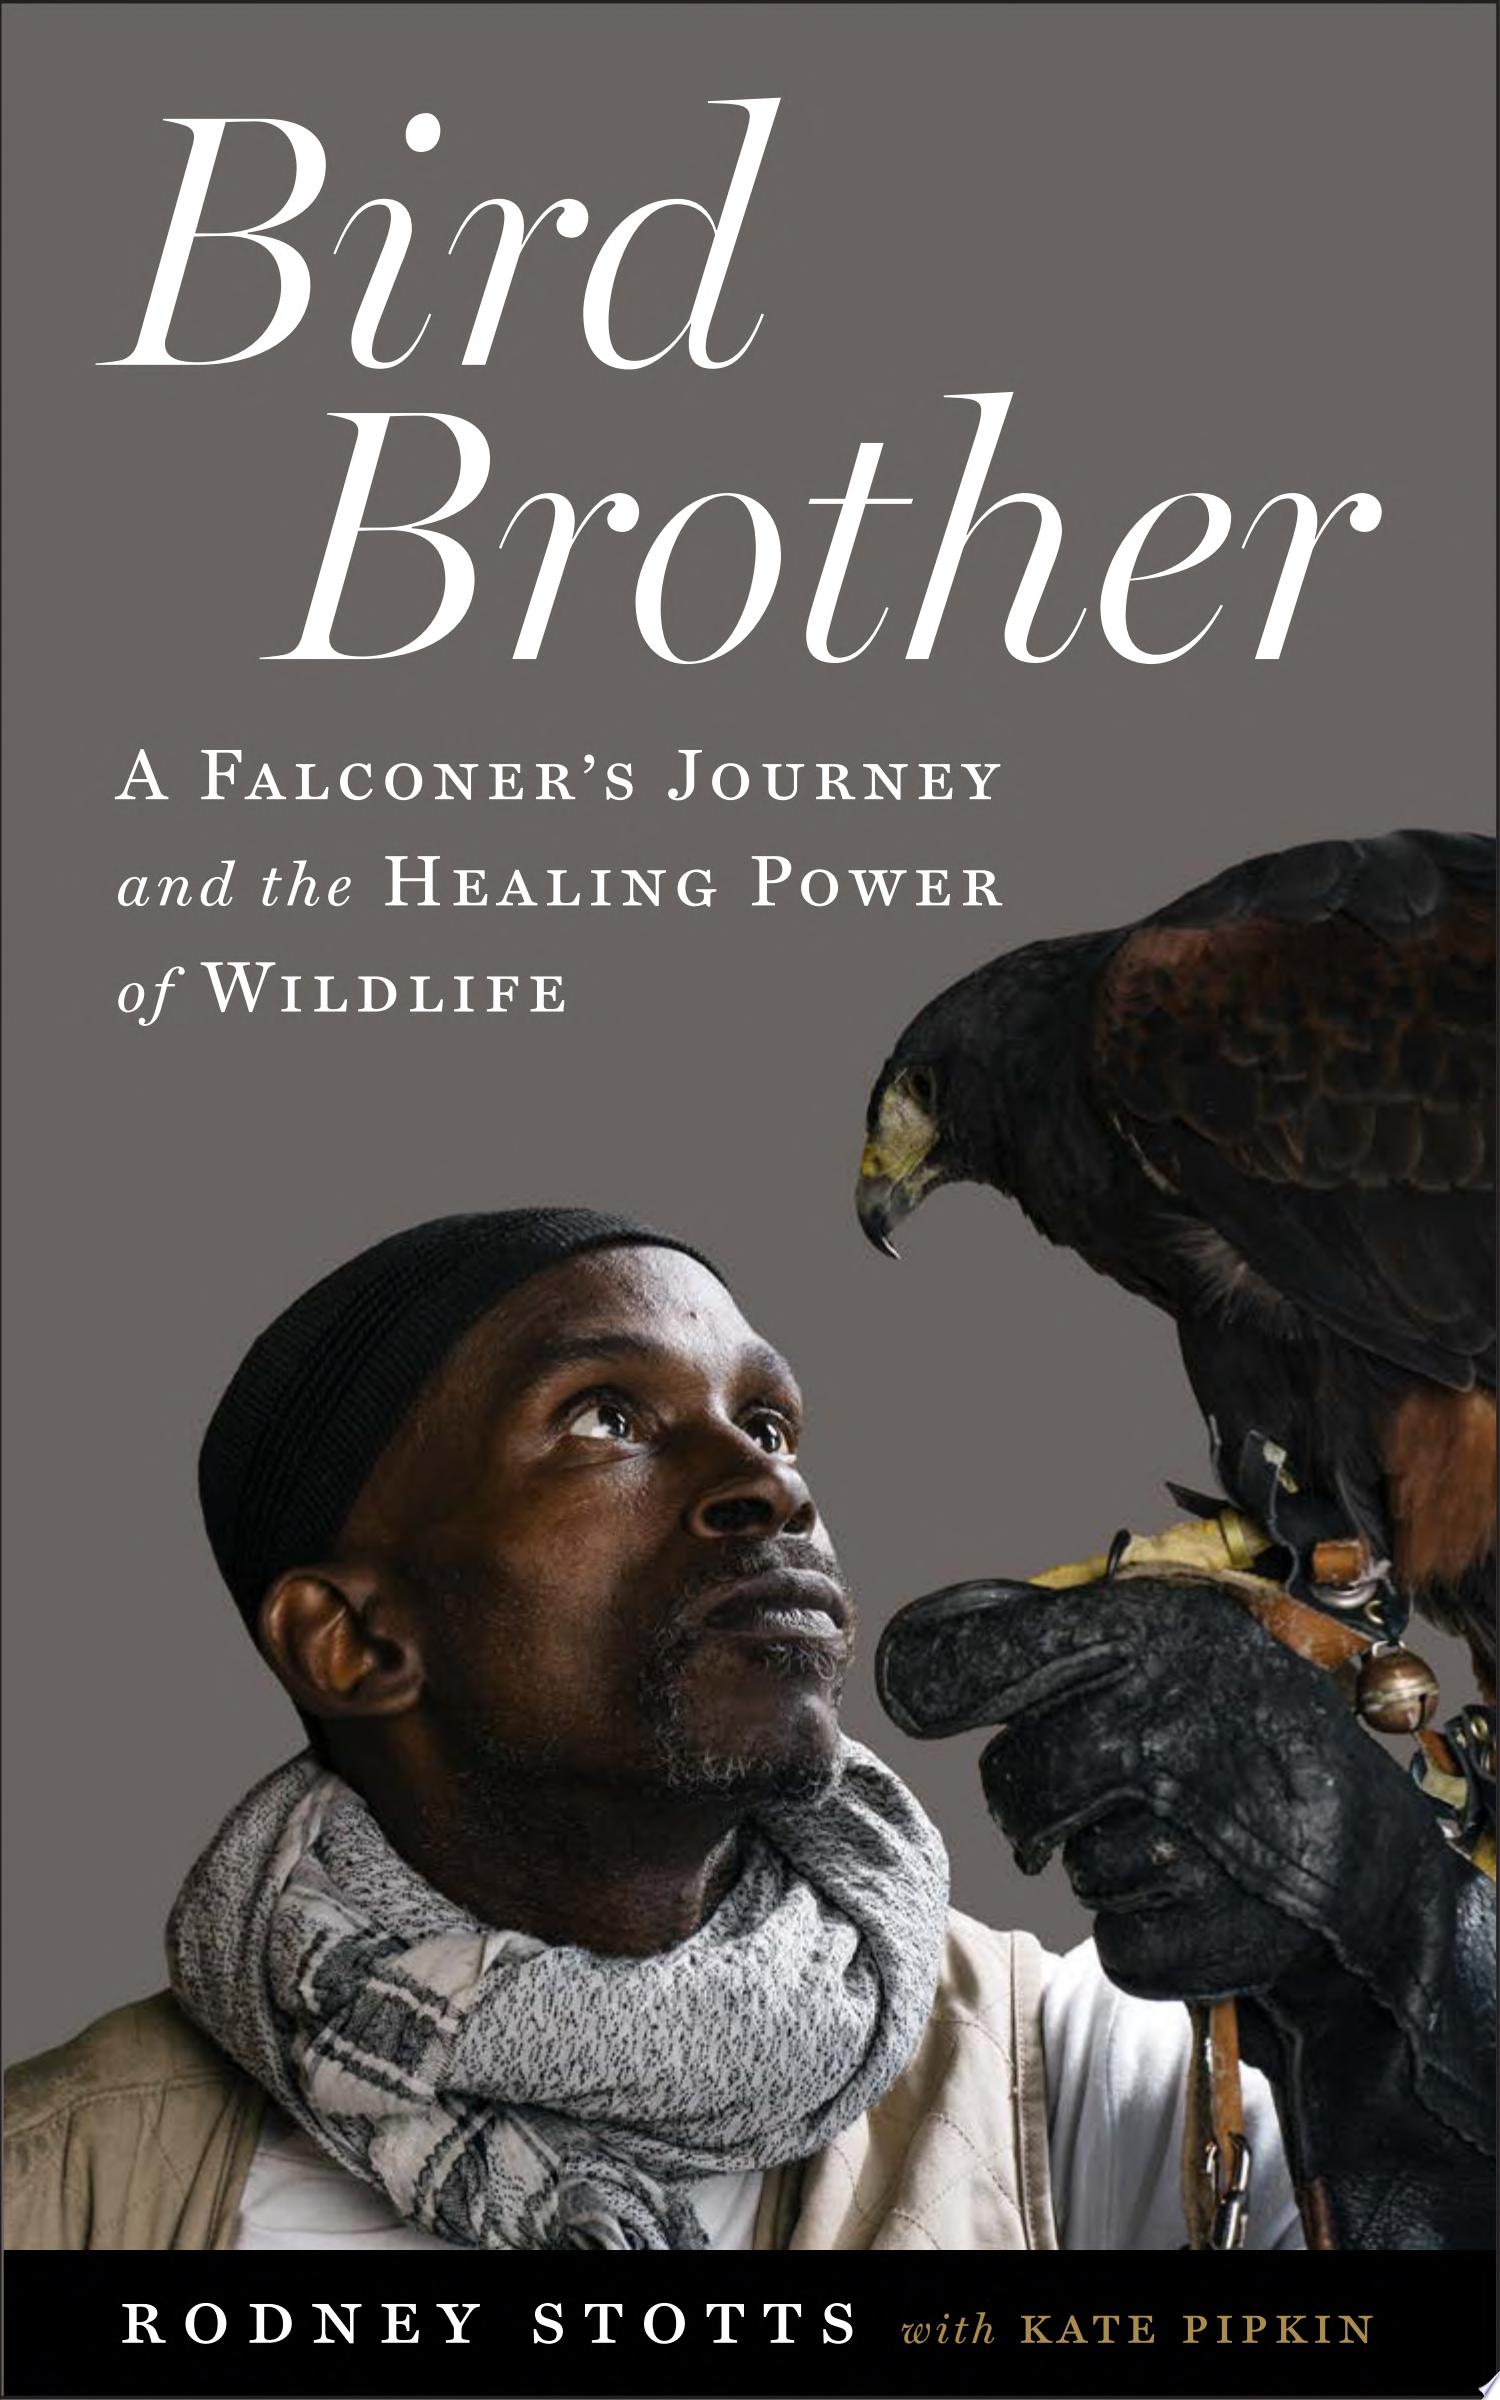 Image for "Bird Brother"